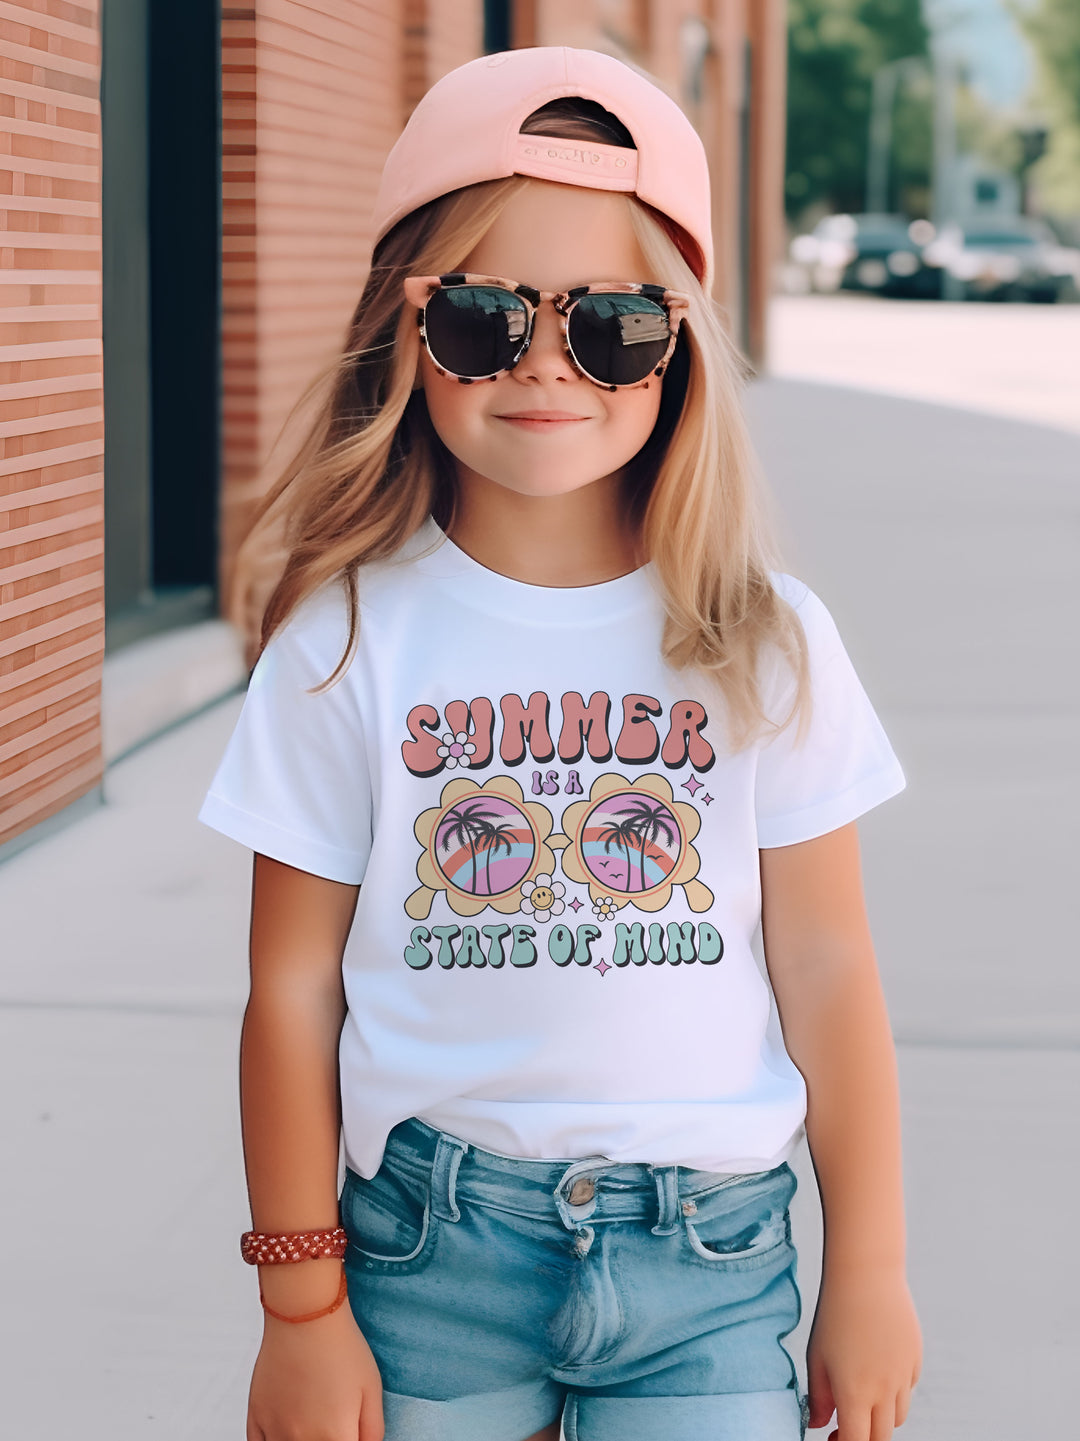 Summer State of Mind Kids Graphic Tee